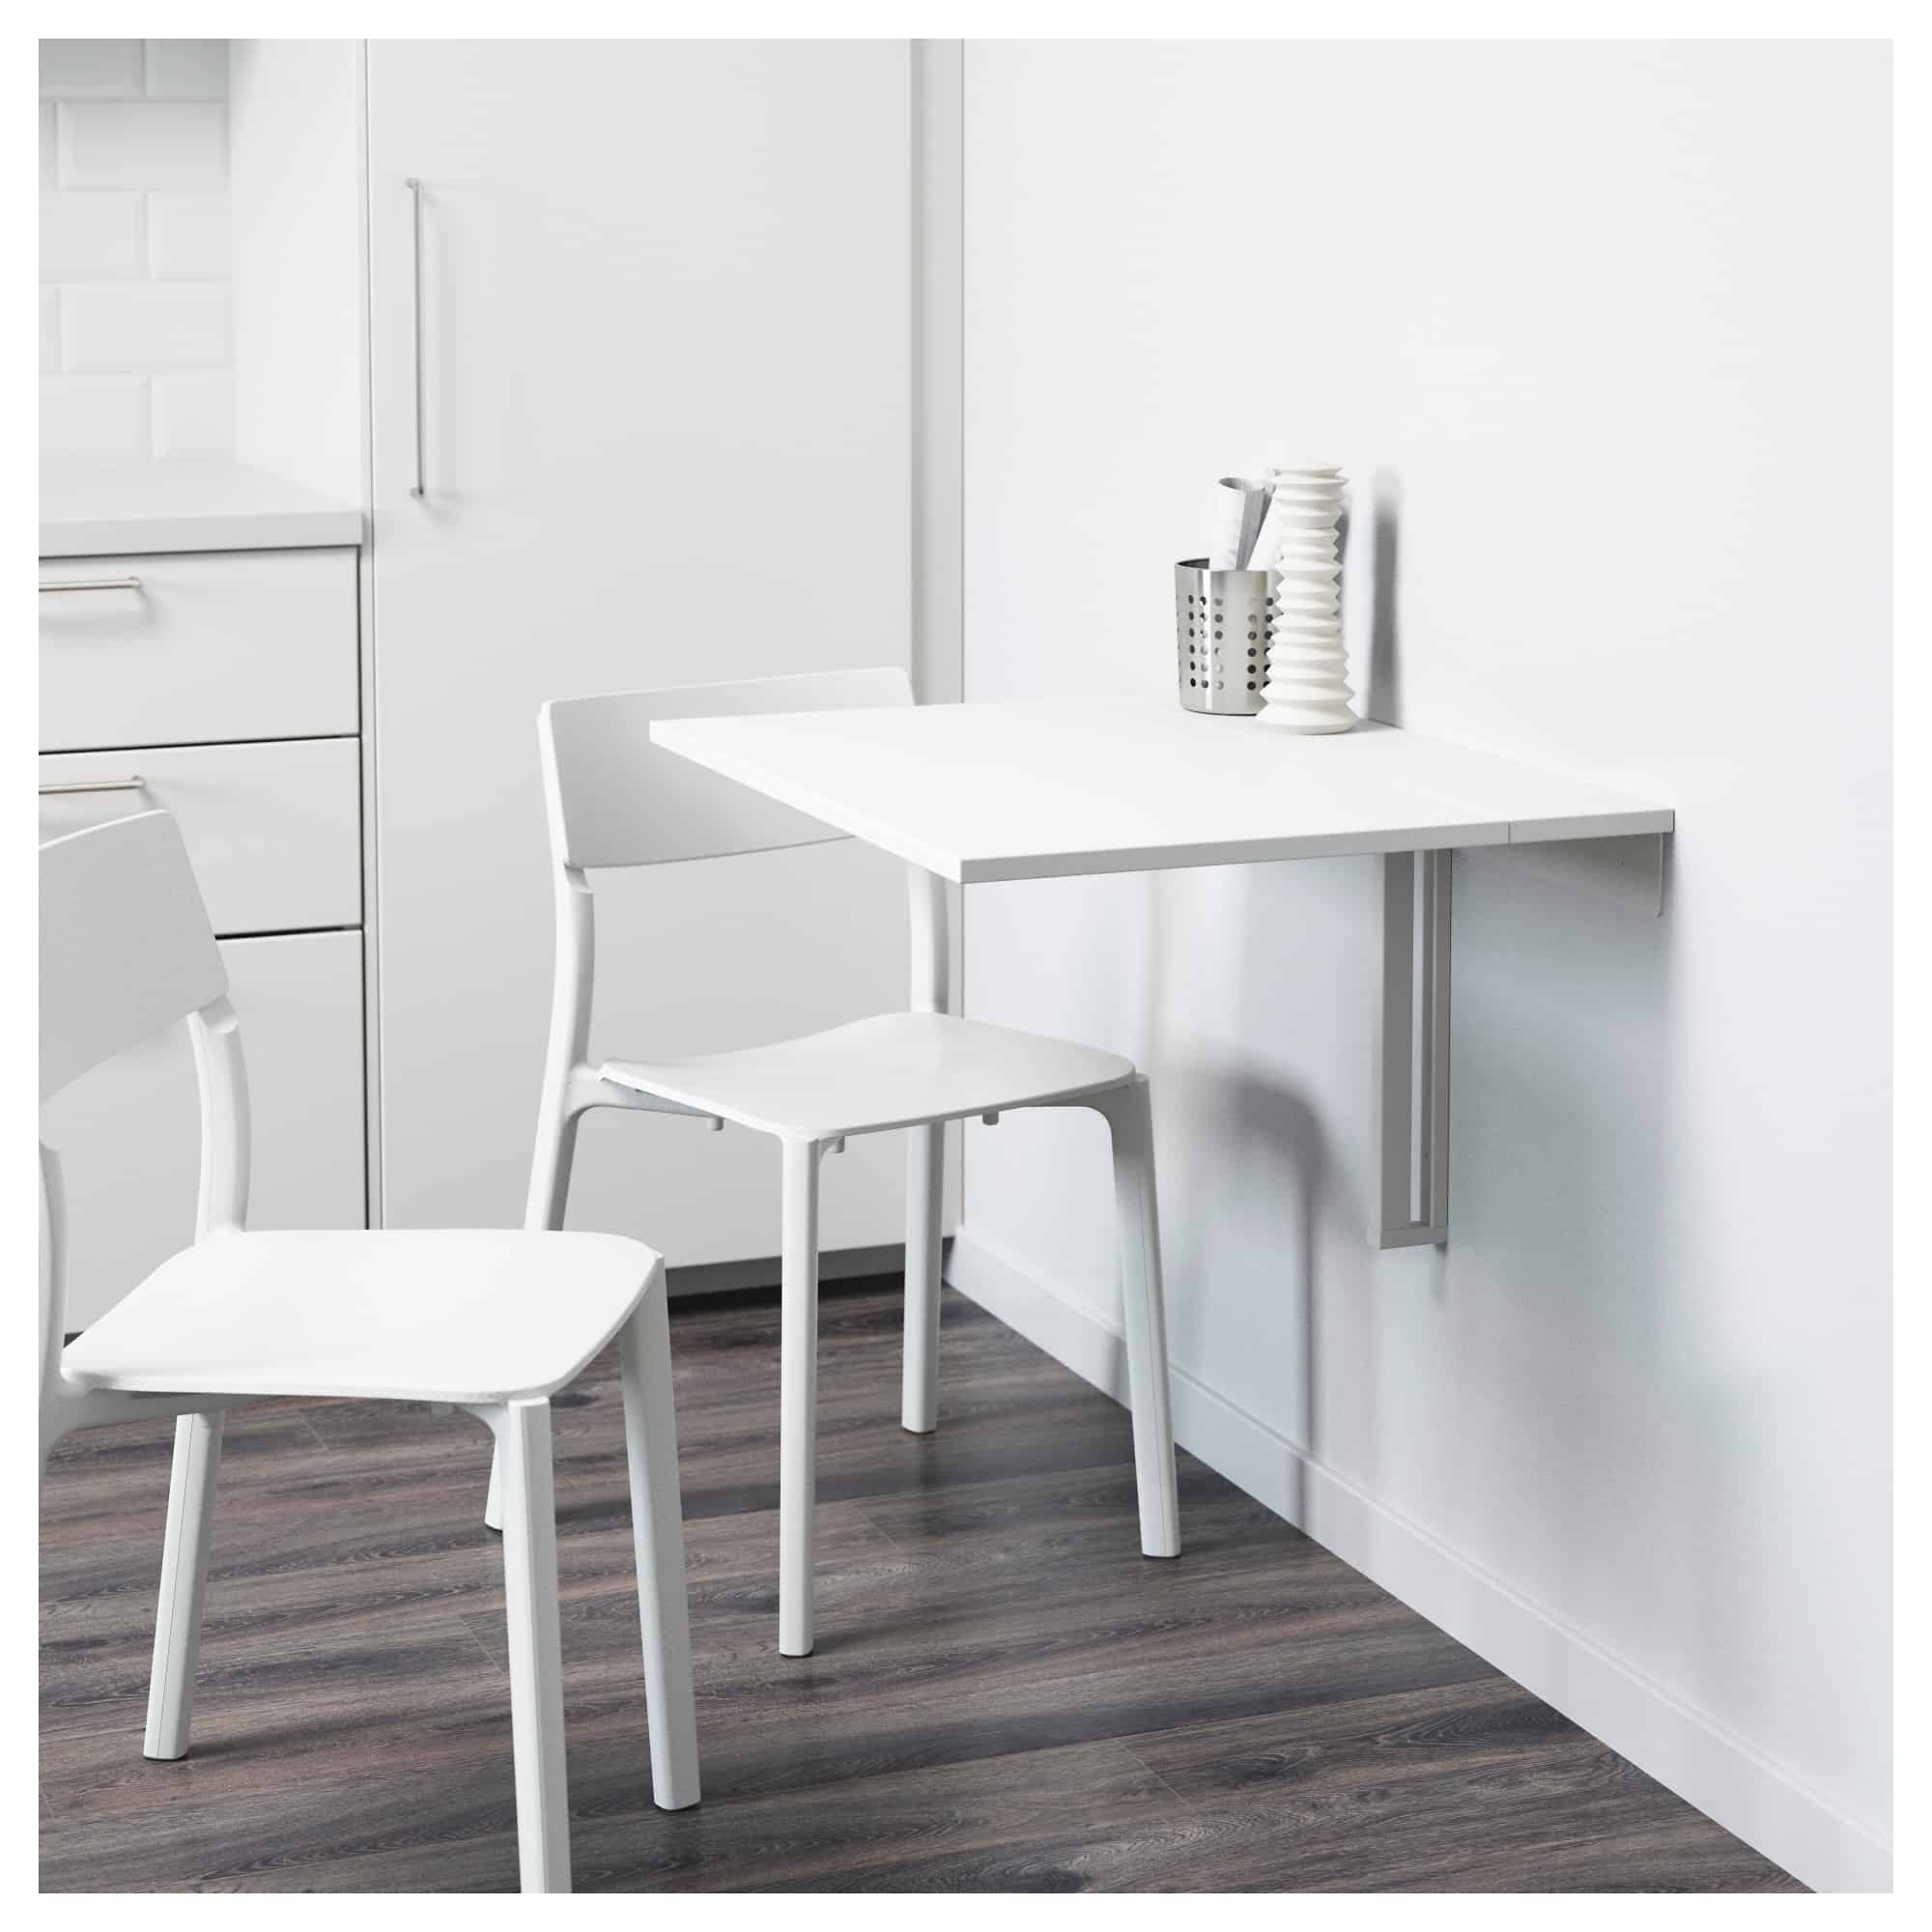 white drop leaf table with two chairs and decor in a white room